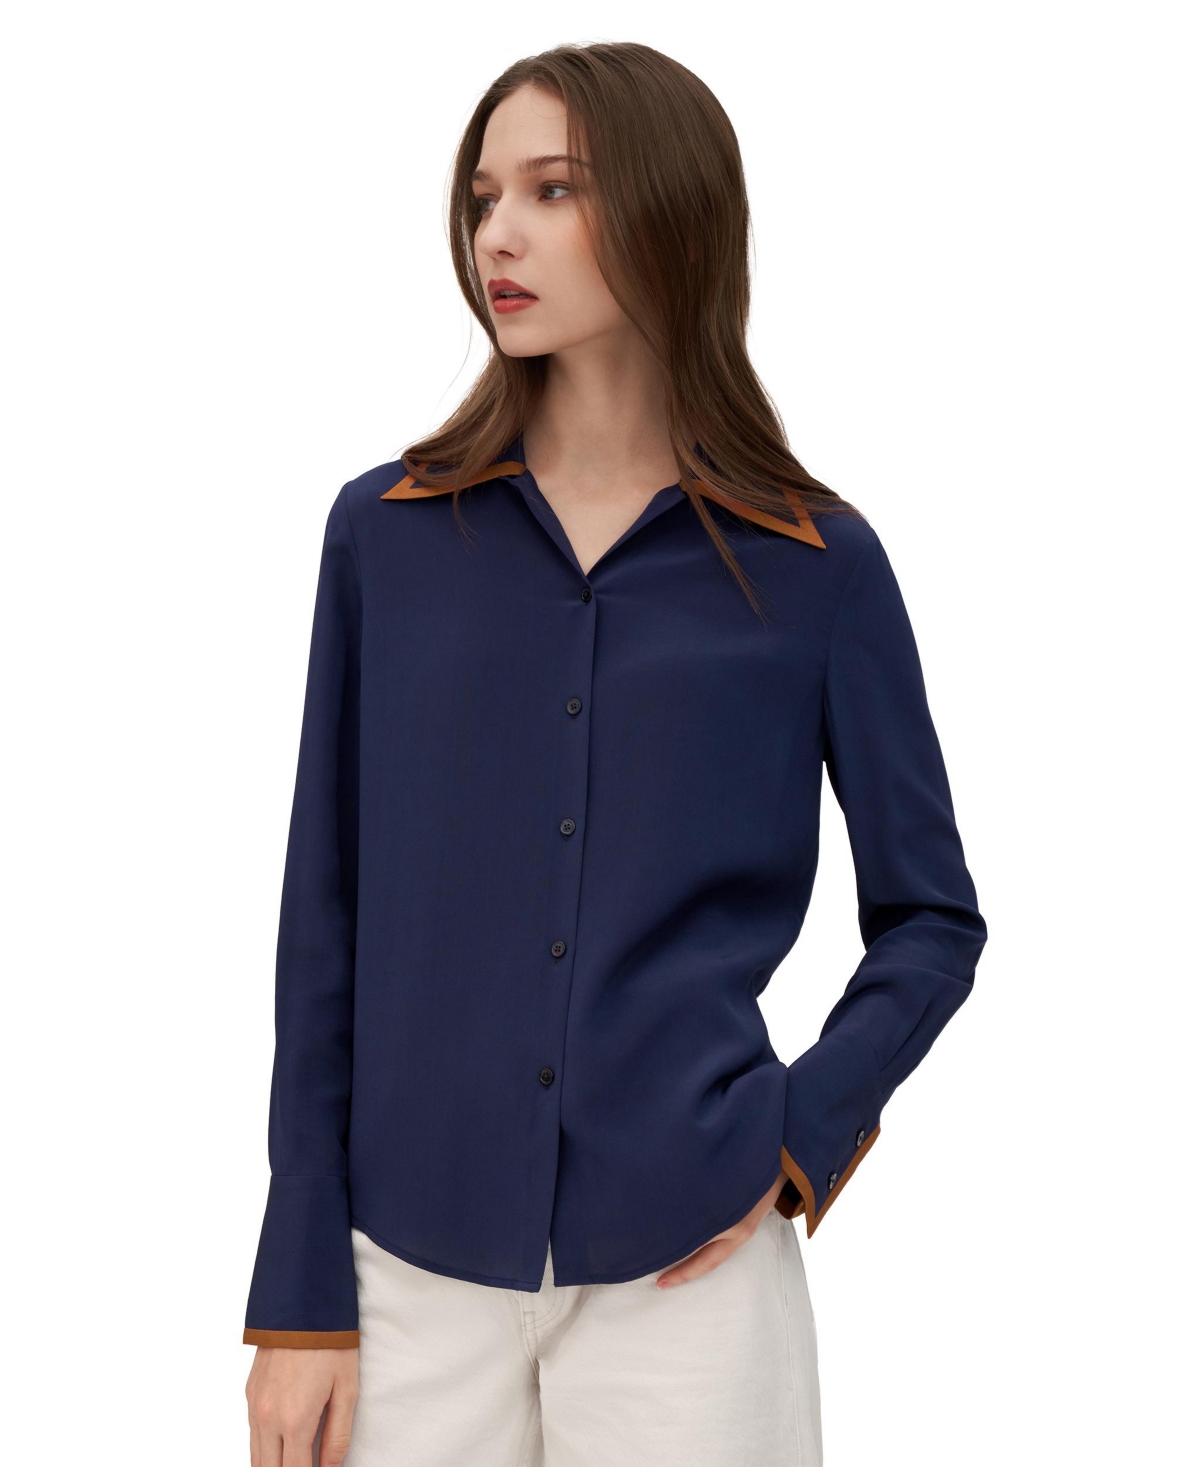 Women's Contrast Piping Silk Willow Shirt for Women - Natural-white